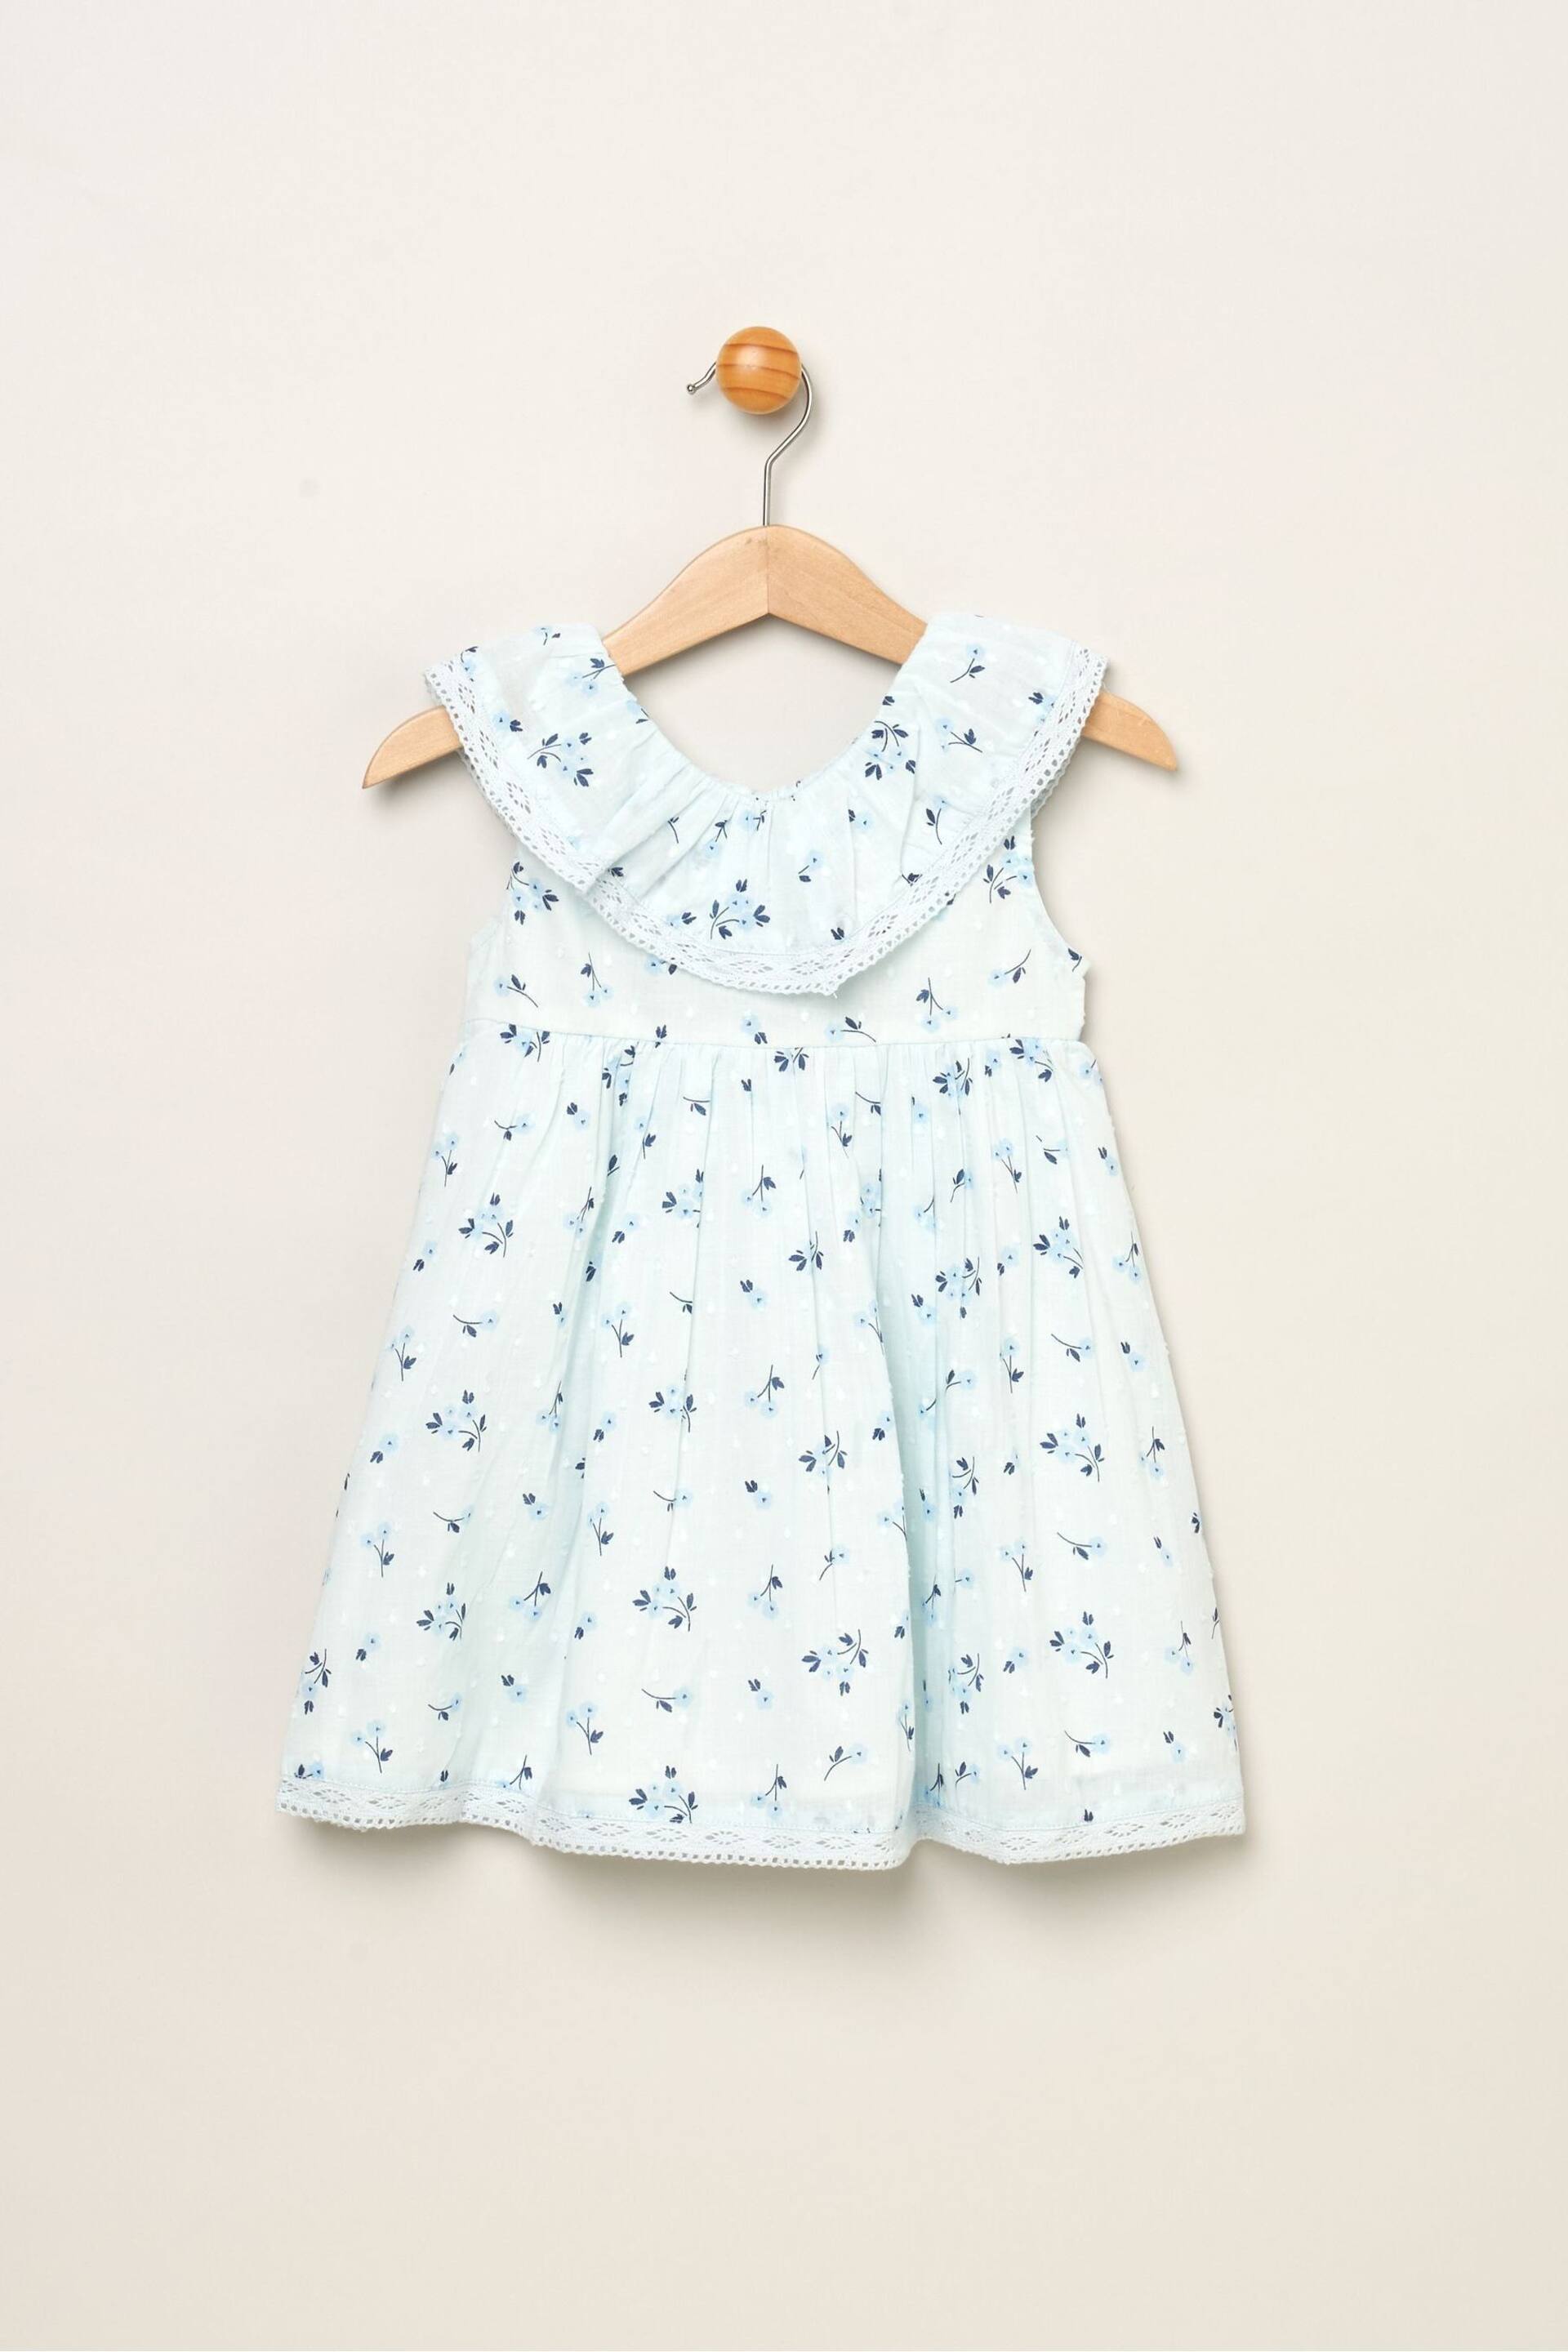 Rock-A-Bye Baby Boutique Blue Floral Print Frill V-Neck Dress and Headband Outfit Set - Image 1 of 3